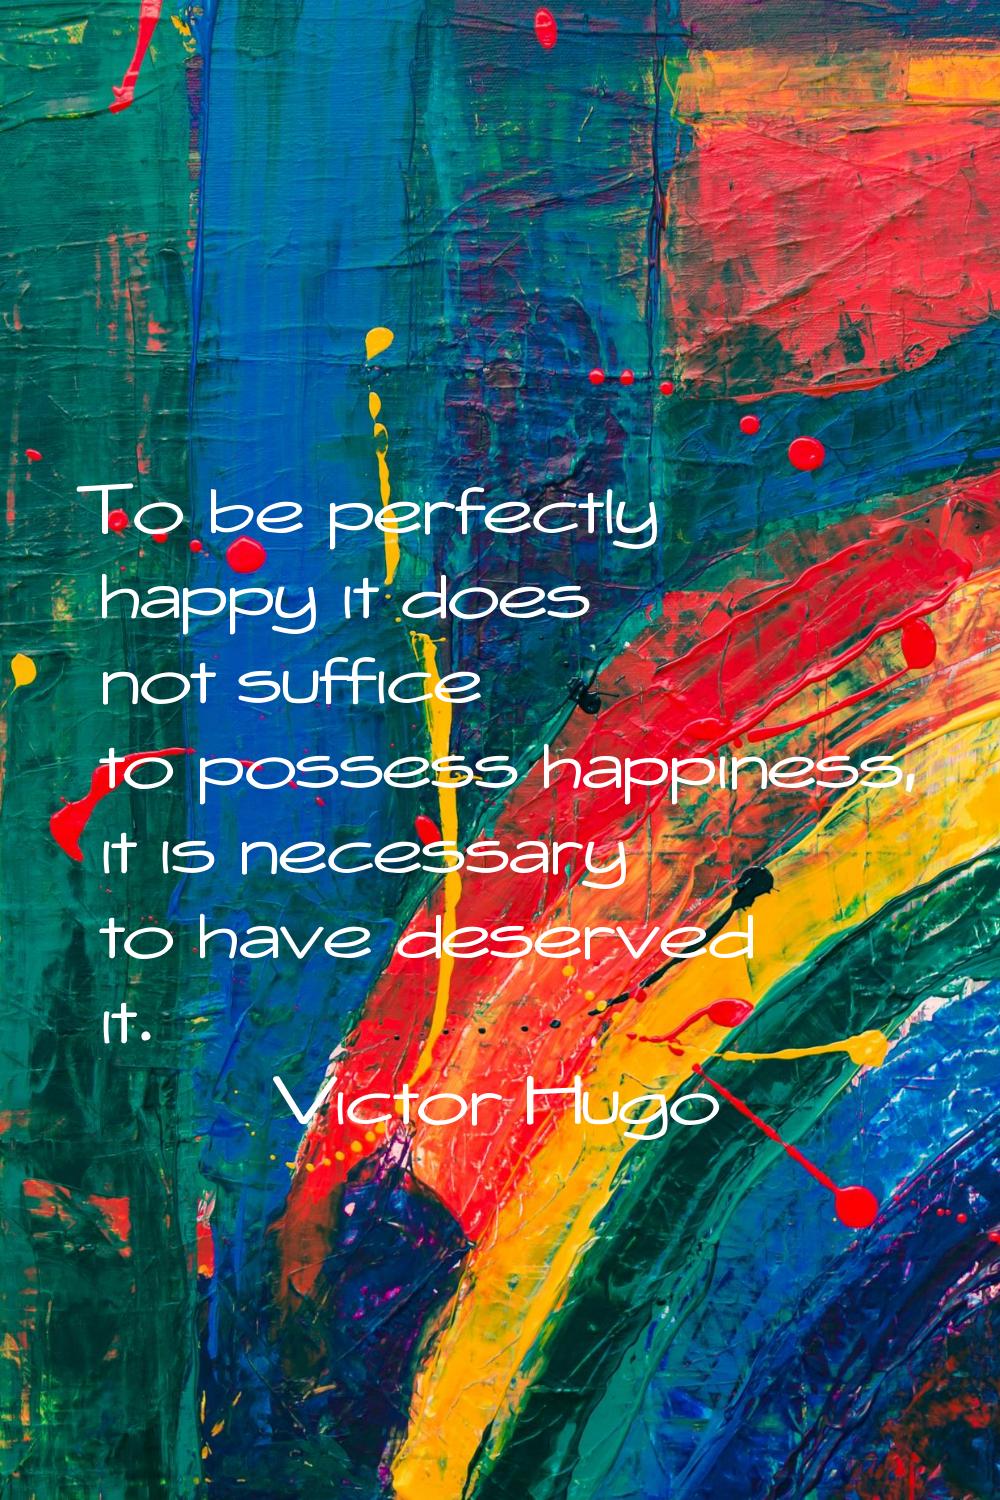 To be perfectly happy it does not suffice to possess happiness, it is necessary to have deserved it